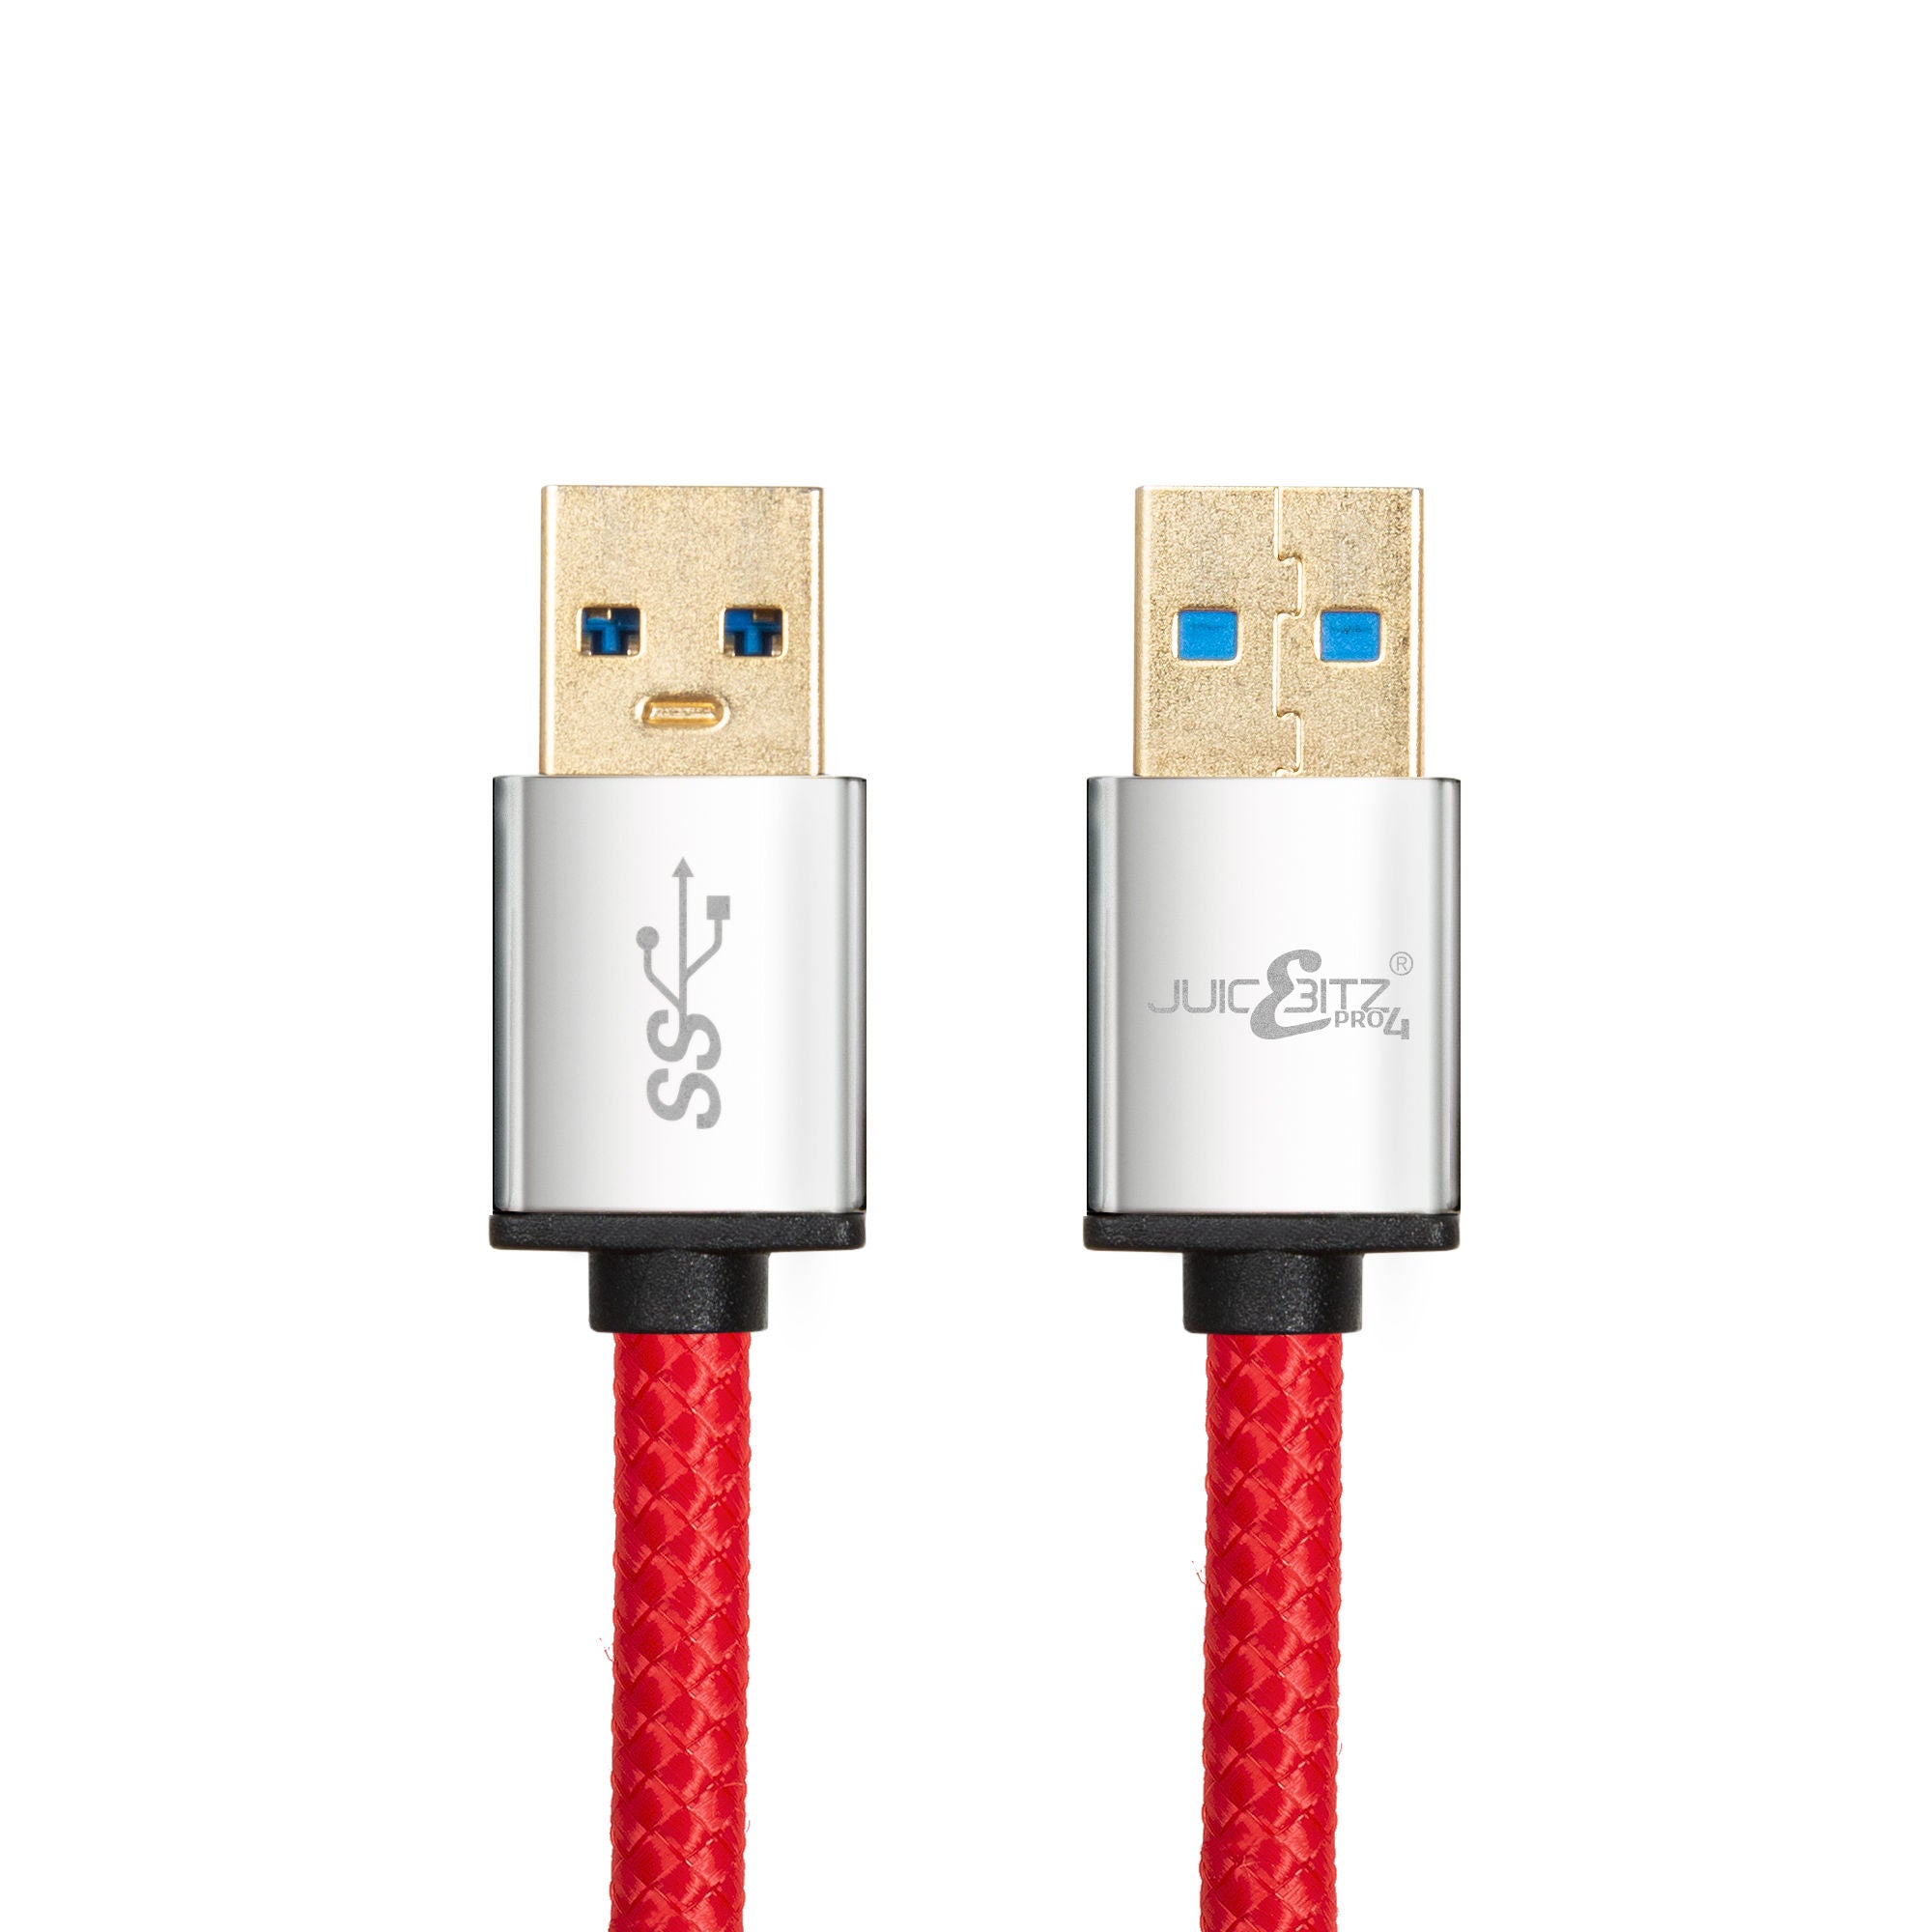 PRO Series Braided Superspeed Male to Male USB 3.0 Data Transfer Cable - Red